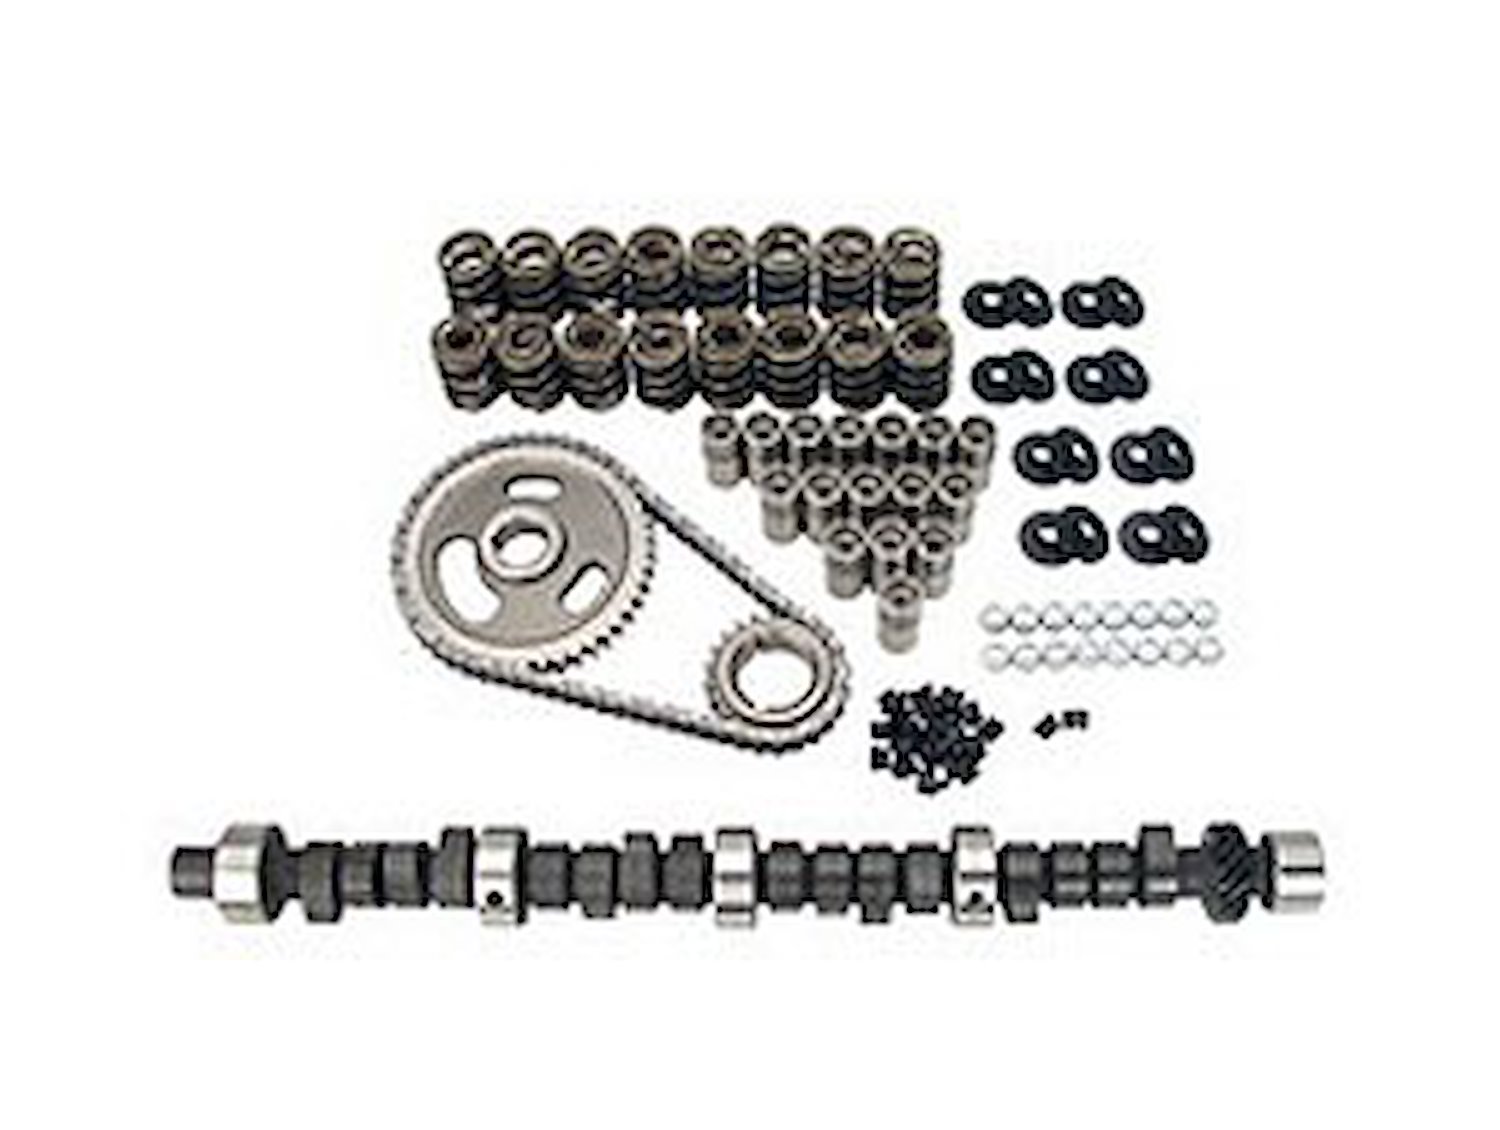 Thumpr Hydraulic Flat Tappet Camshaft Complete Kit Lift .512"/.497" Duration 295/312 RPM Range 2500-6400